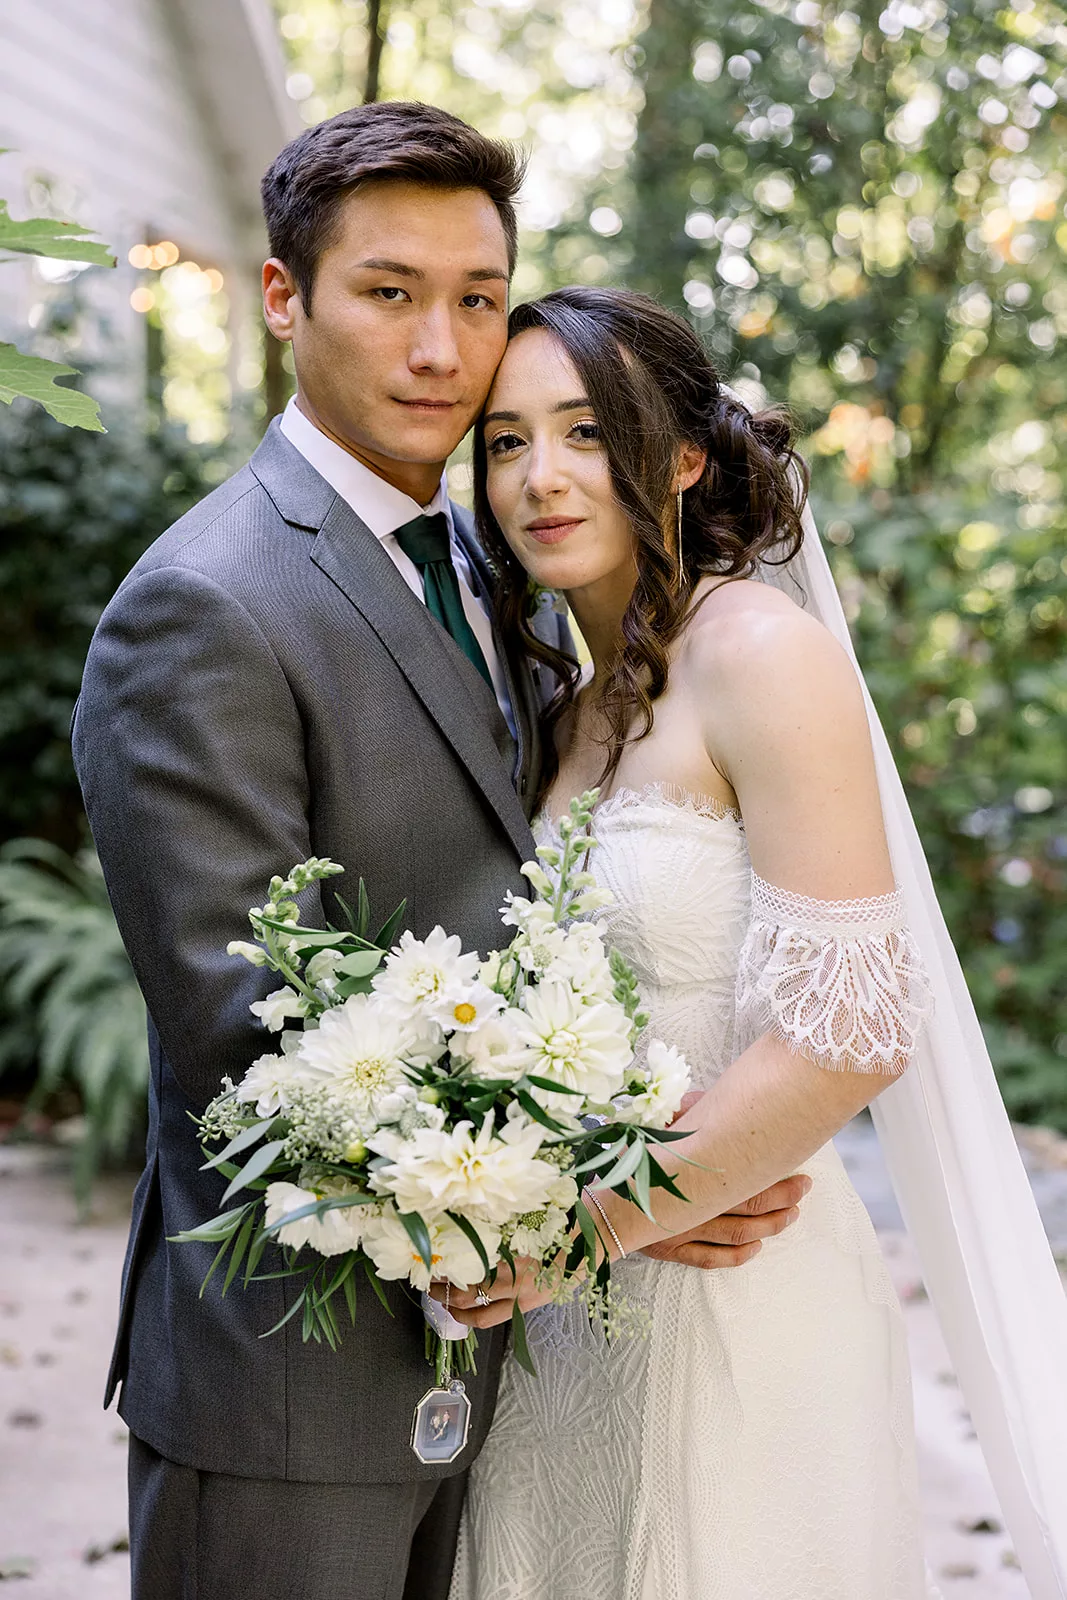 Newlyweds stand together holding a bouquet on the patio in the woods